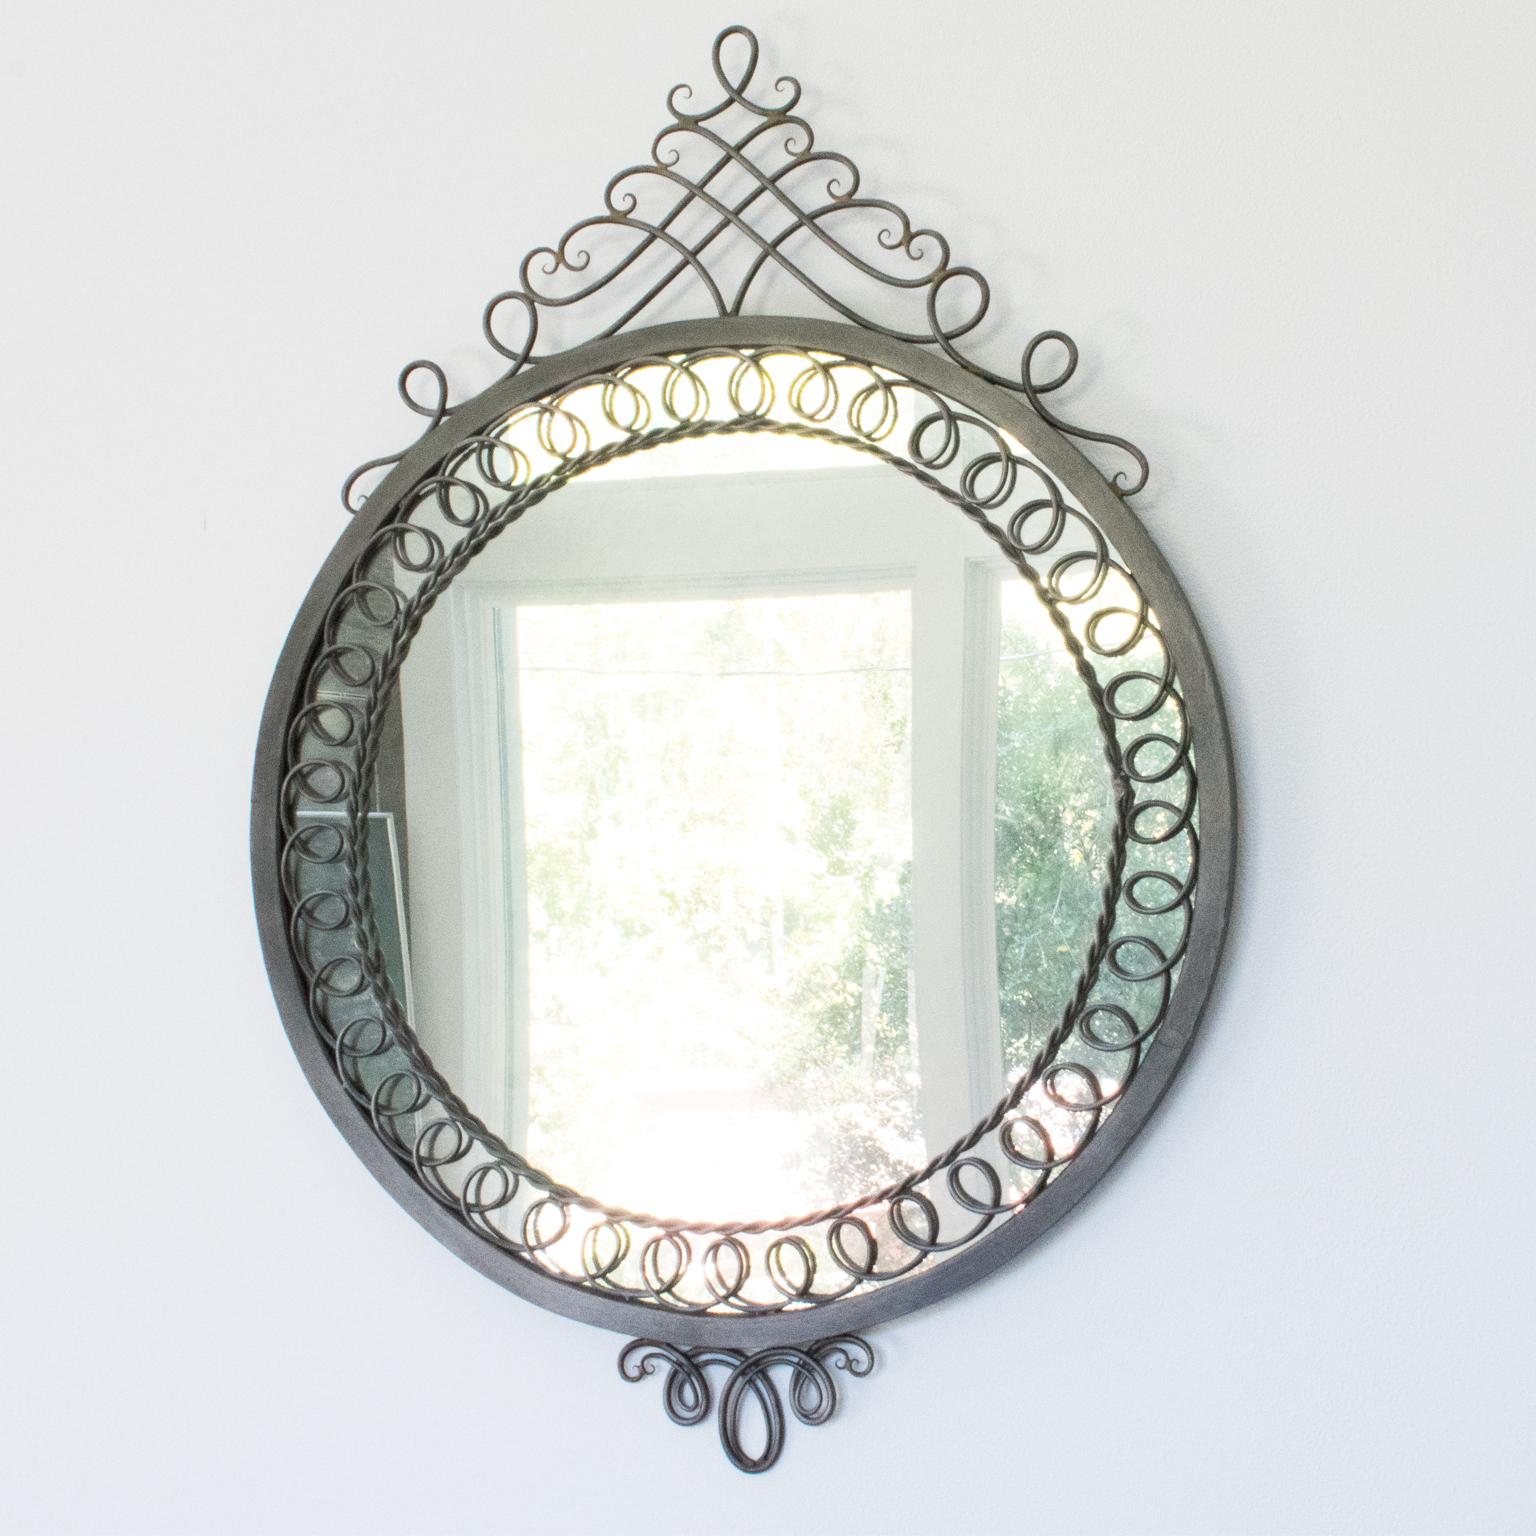 This striking French 1950s Mid-Century neoclassic cast iron wall mirror is a timeless piece of home decor. Its impressive rounded shape is surrounded by ornately detailed metal framing, finished with a beautiful original gunmetal patina. The lack of